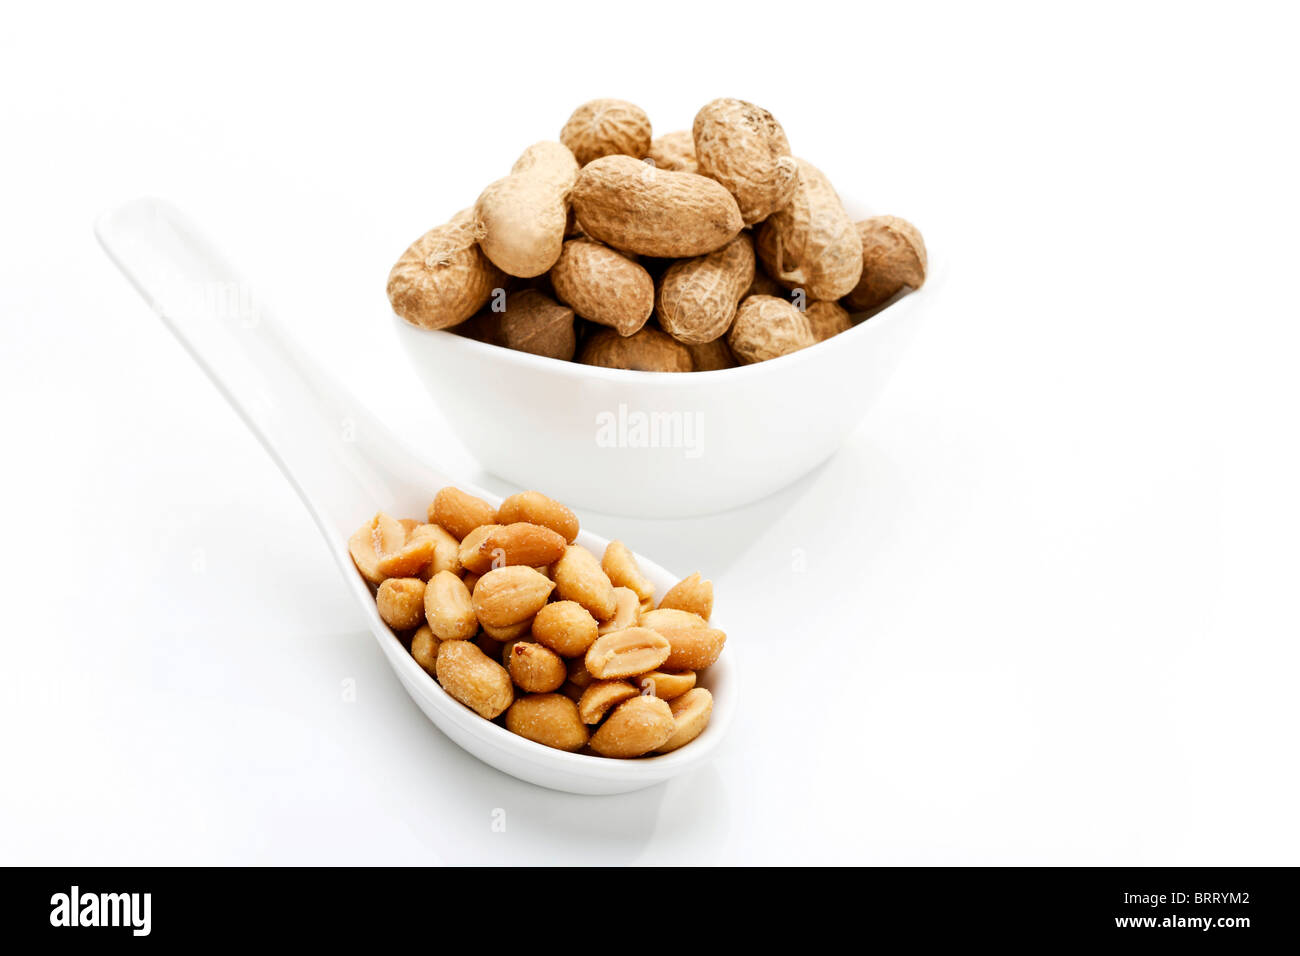 Salted peanuts and peanuts in shell Stock Photo